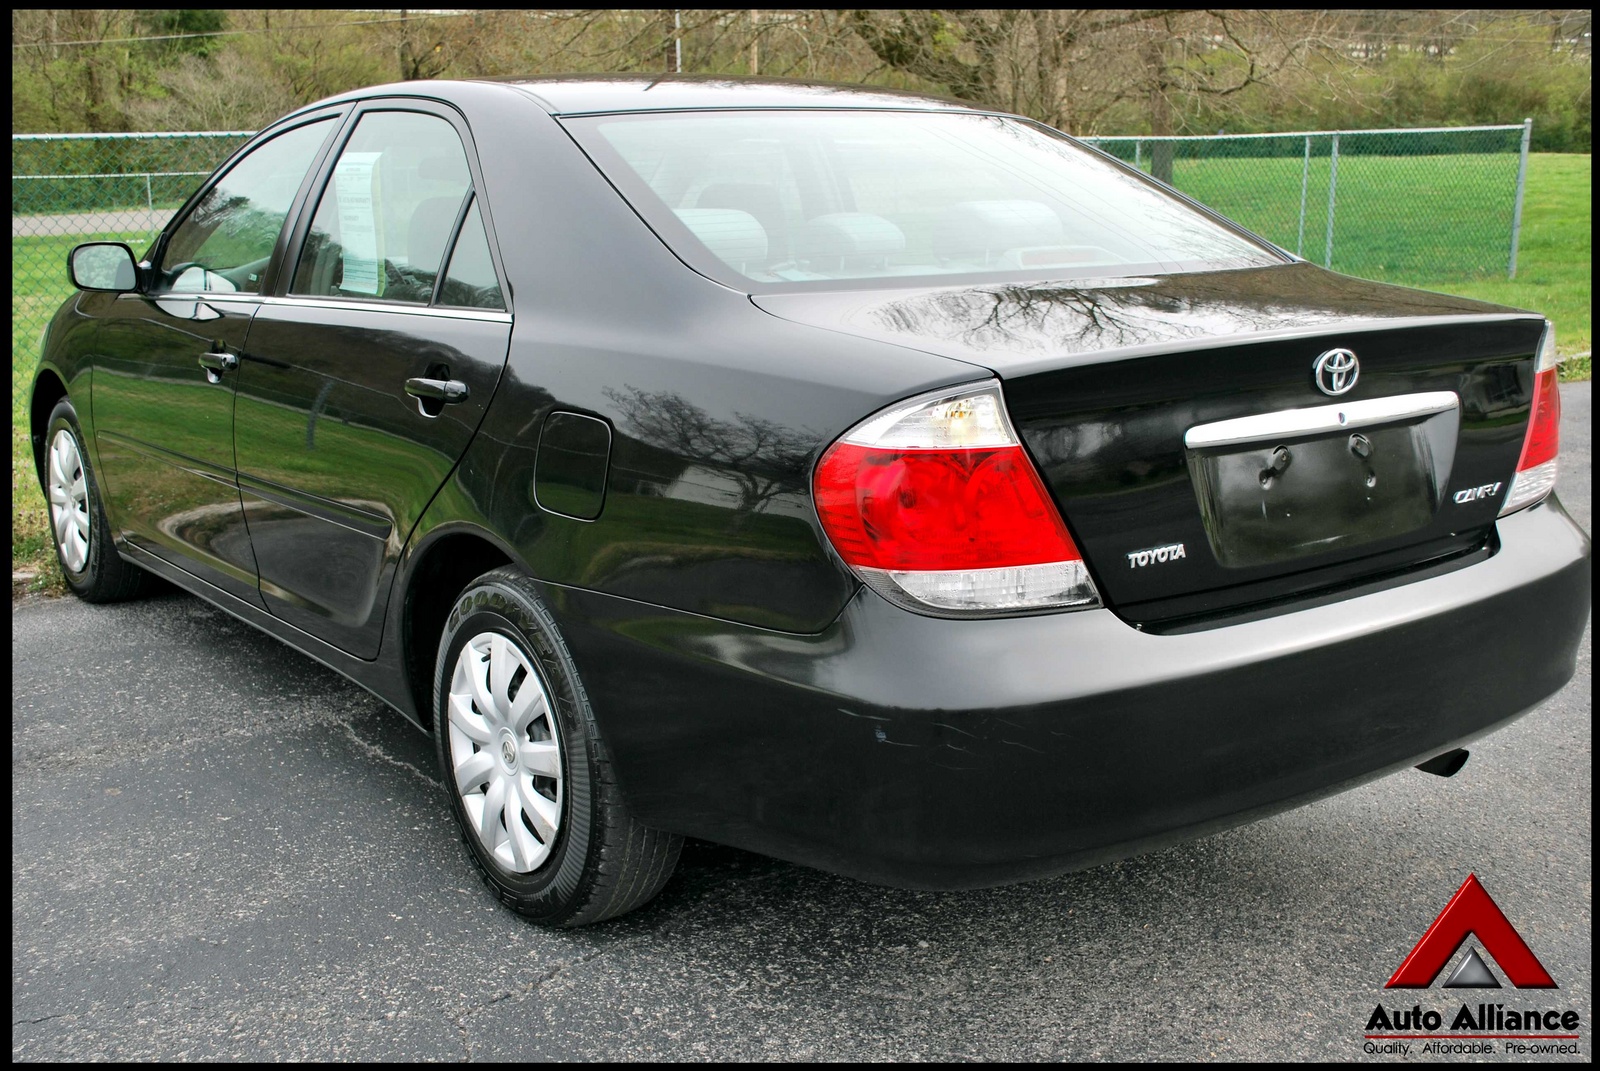 2005 toyota camry consumer review #4